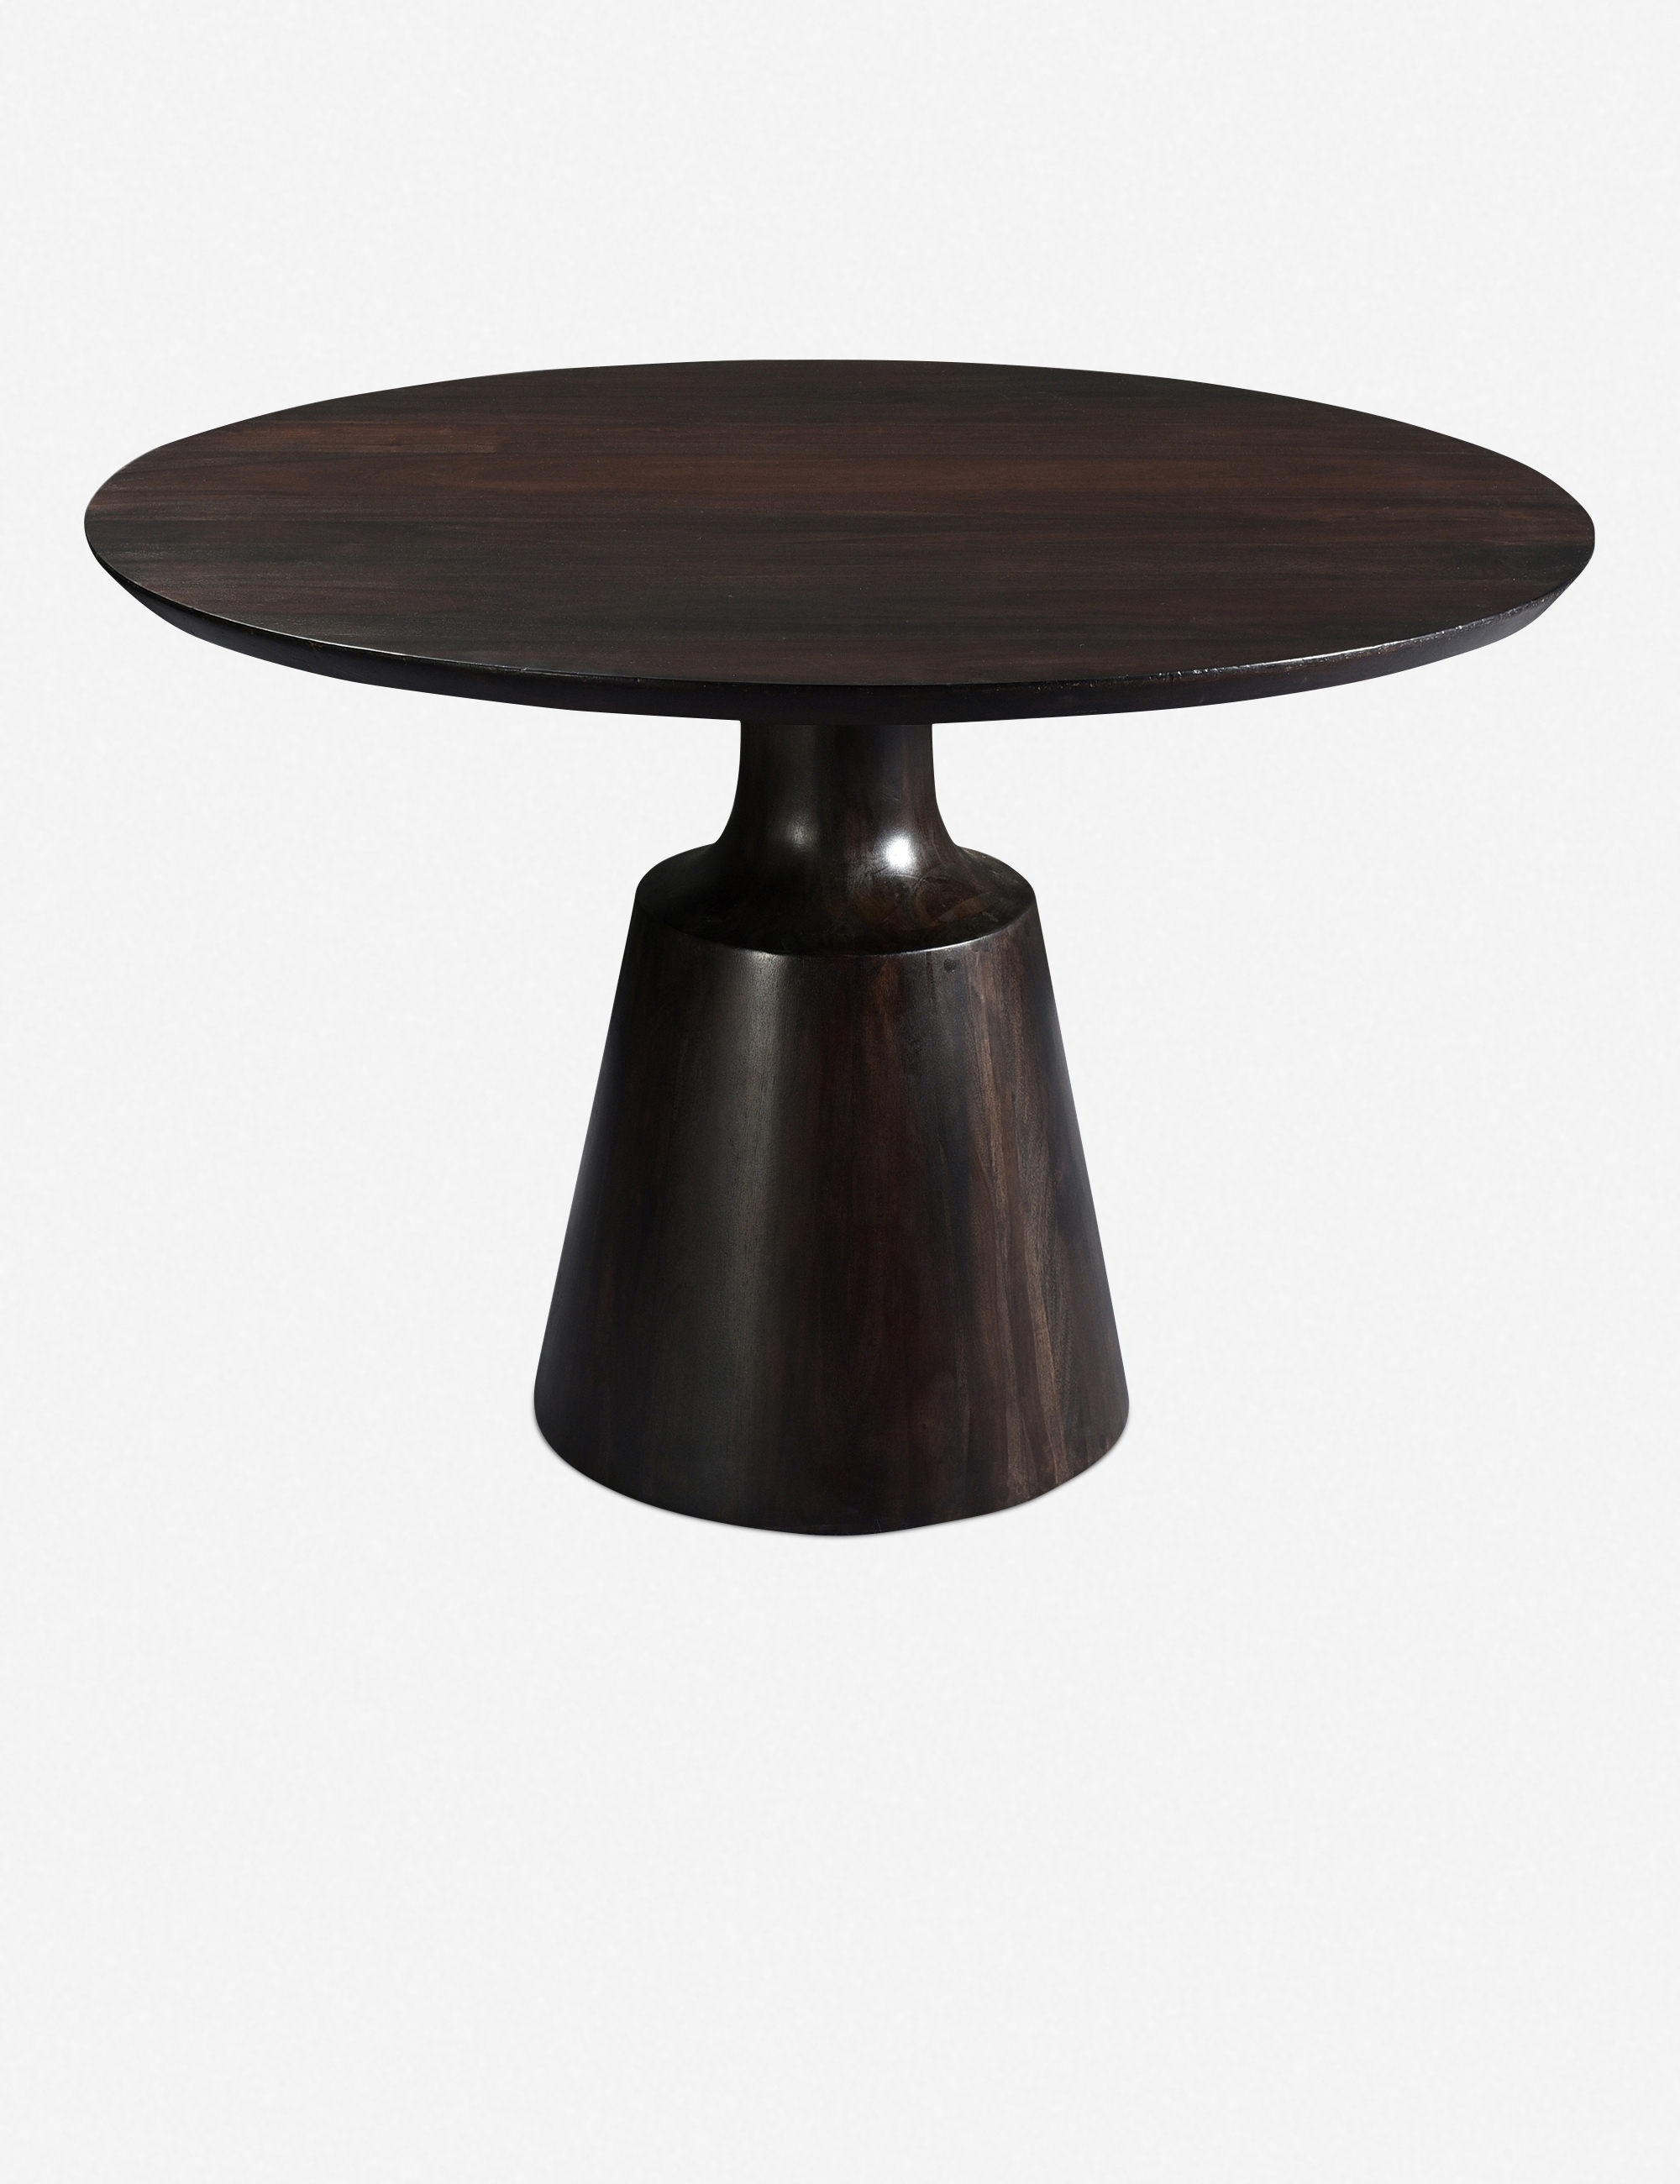 Belize Round Dining Table - Image 1